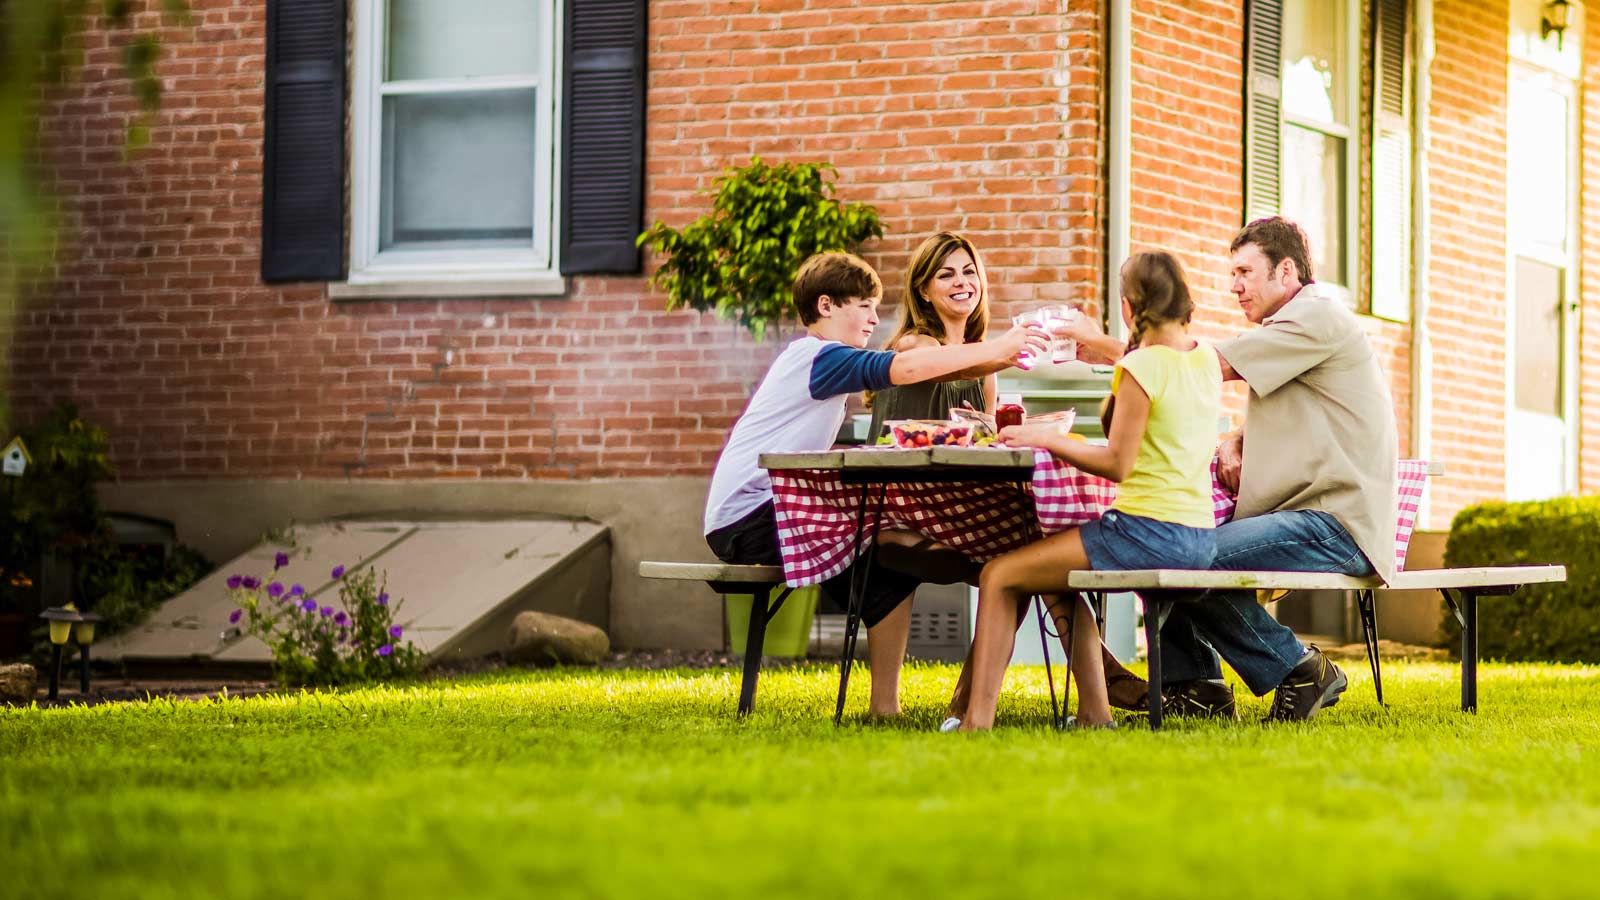 A family enjoys a meal on a picnic bench outside on their bright and green lawn